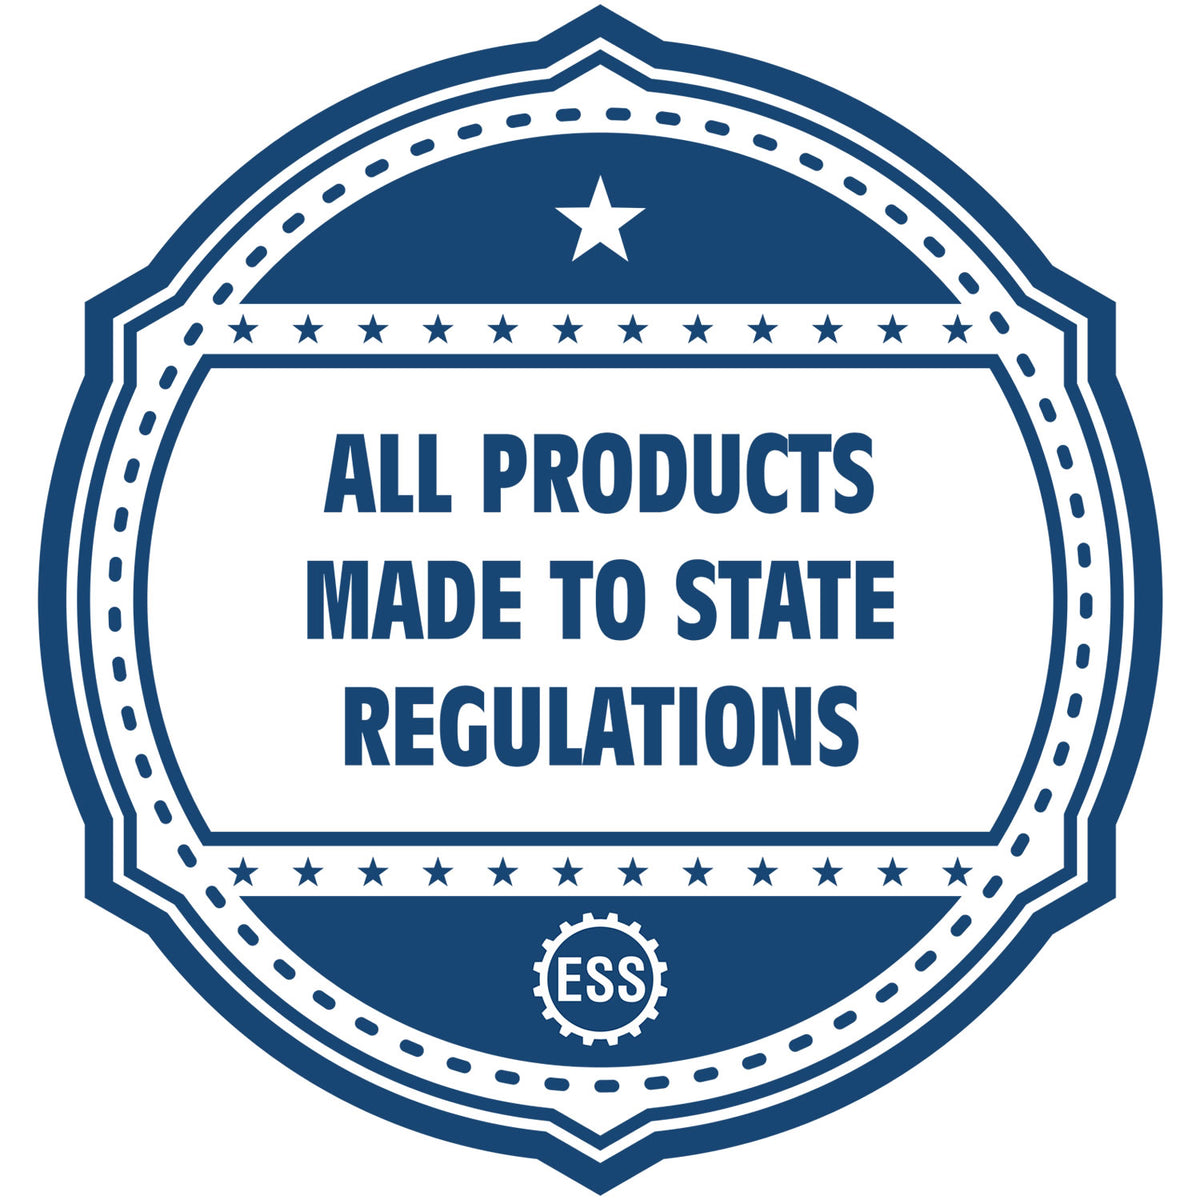 An icon or badge element for the Premium MaxLight Pre-Inked Mississippi Landscape Architectural Stamp showing that this product is made in compliance with state regulations.